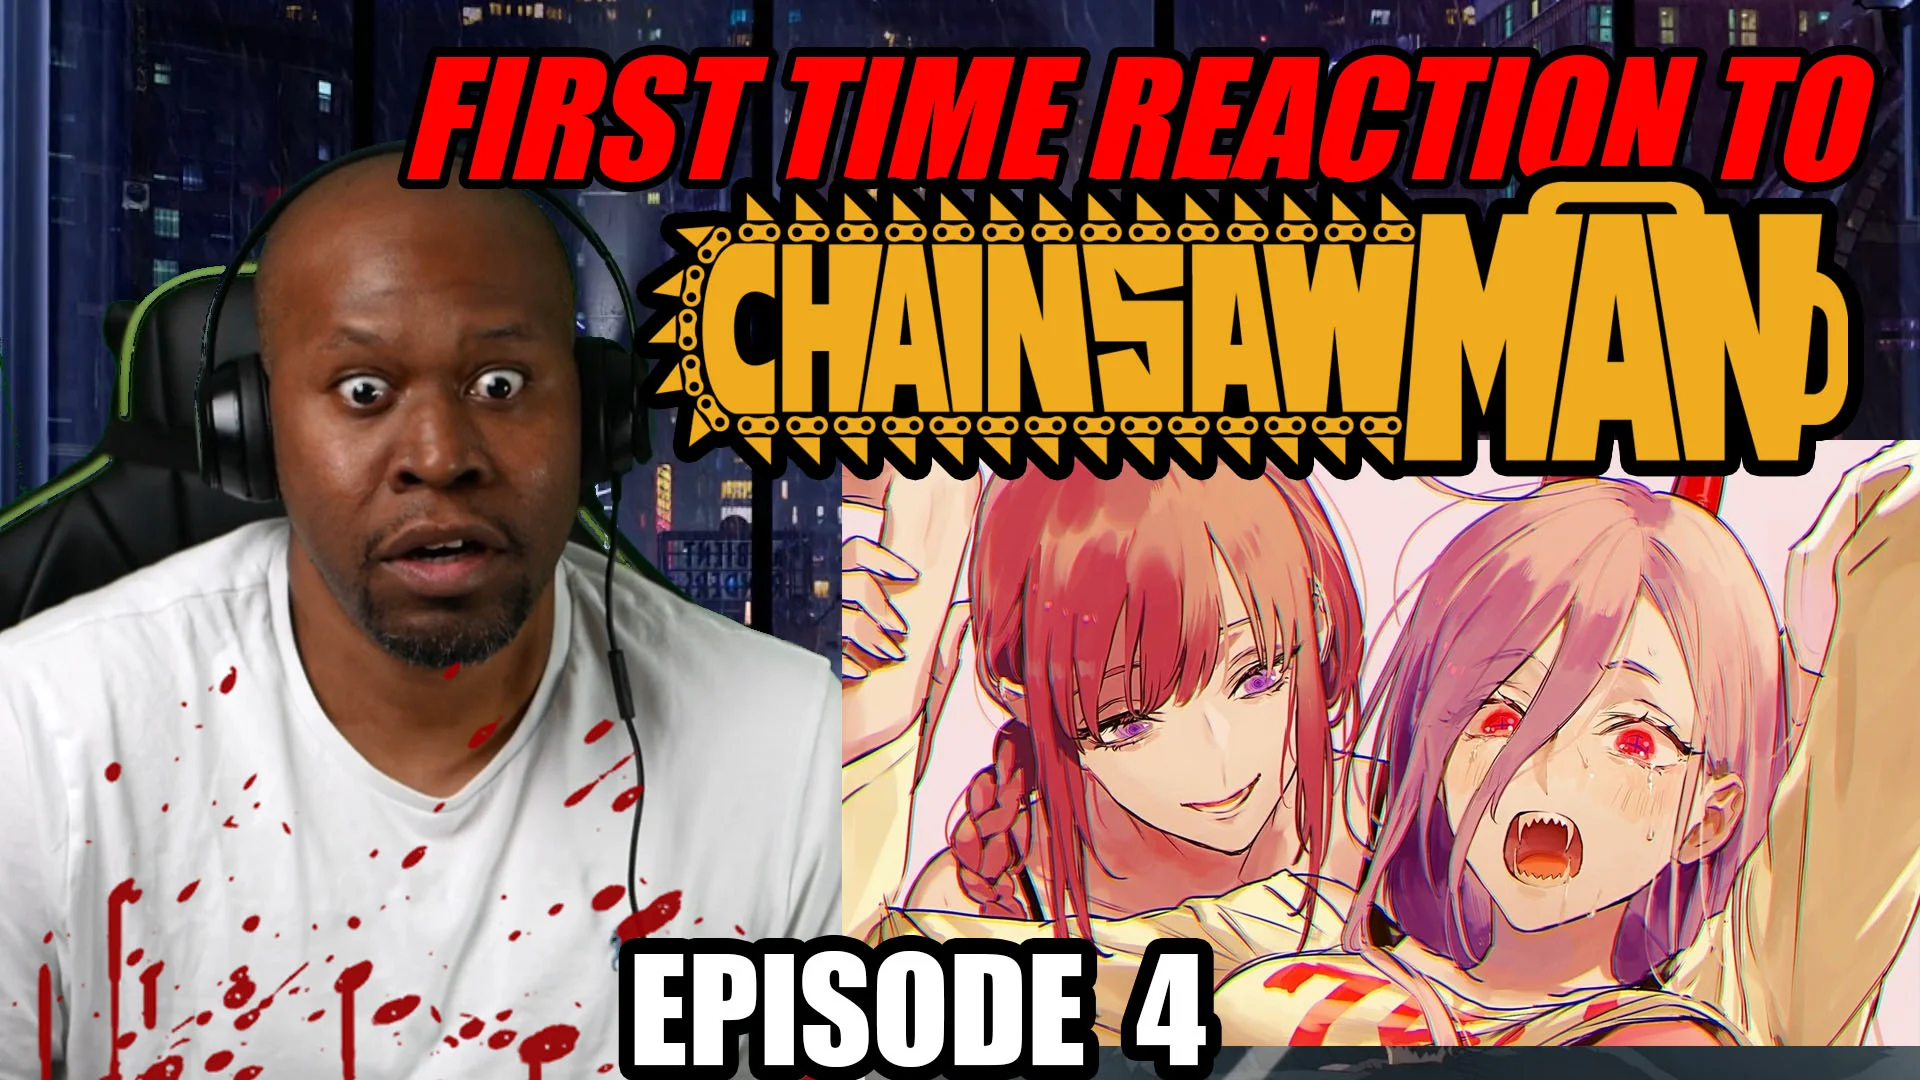 Chainsaw Man Episode 4 Reaction WTF IS THAT?!?